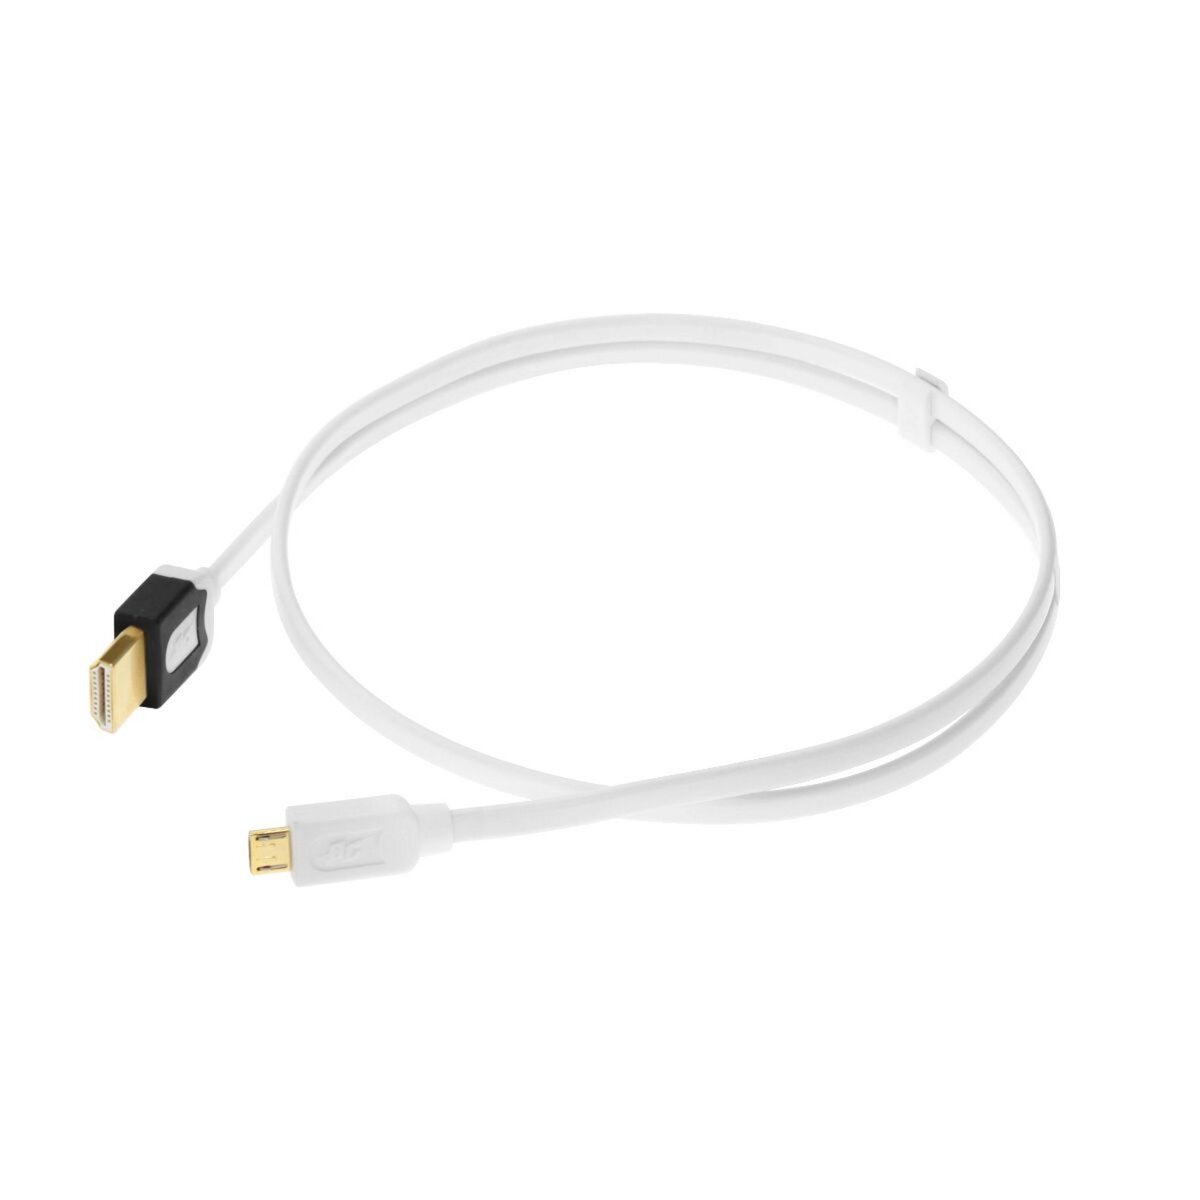 Real Cable Câble MHL 1M50-USB 5 connect.